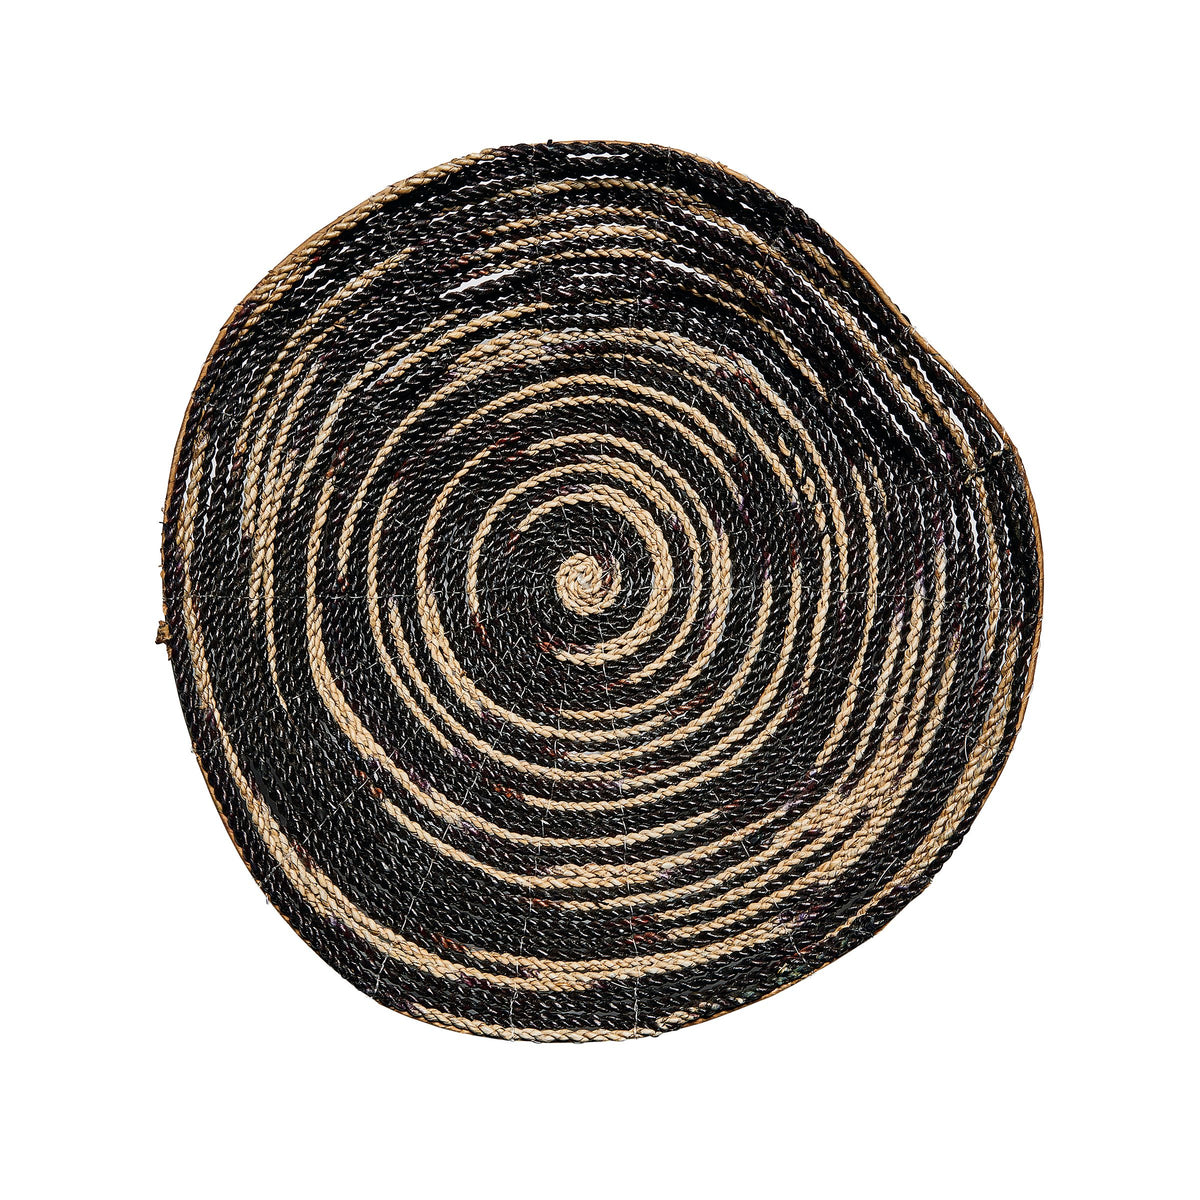 Round Woven Decorative Bowl - (BSH3007)